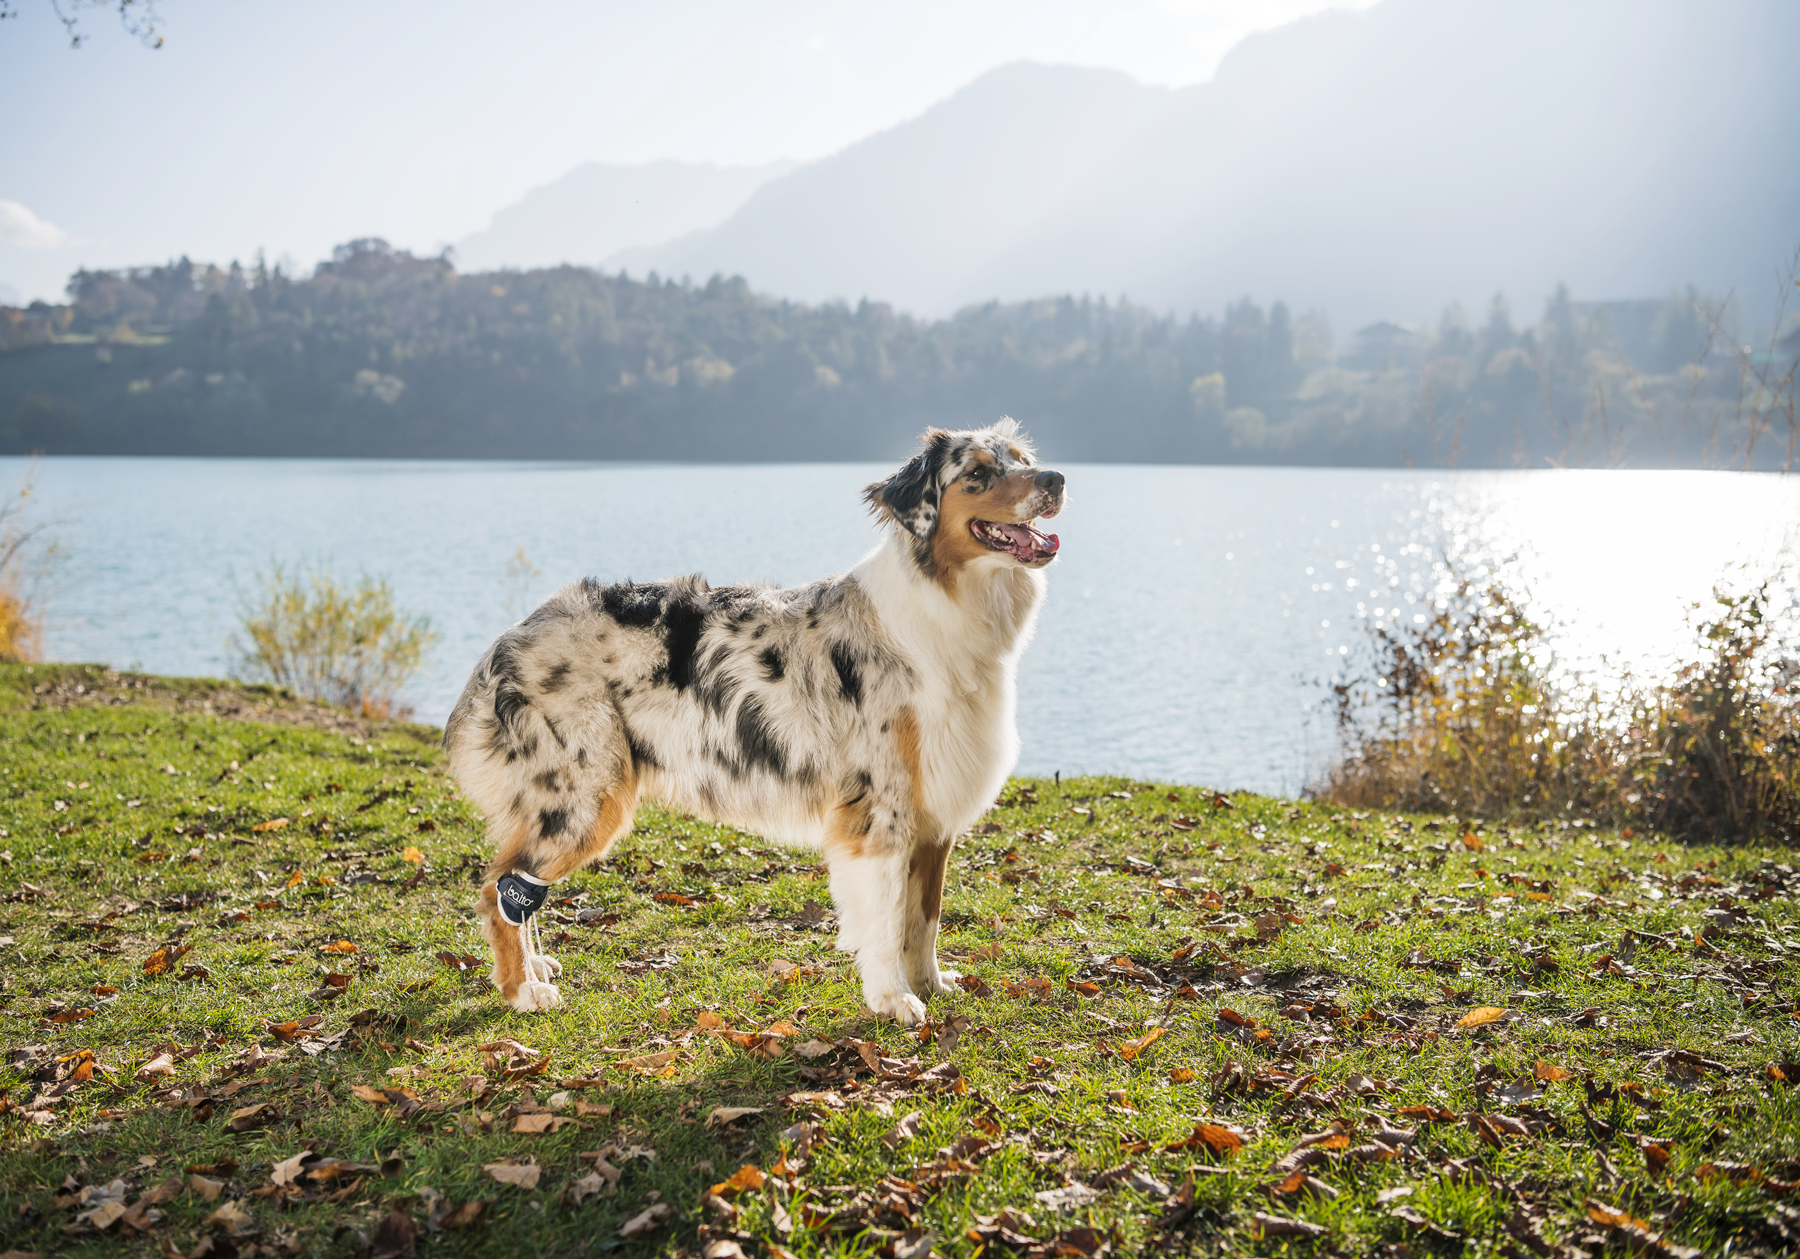 Australian Shepherd in Balto pull brace on back leg in grass and leaves next to a lake and mountains